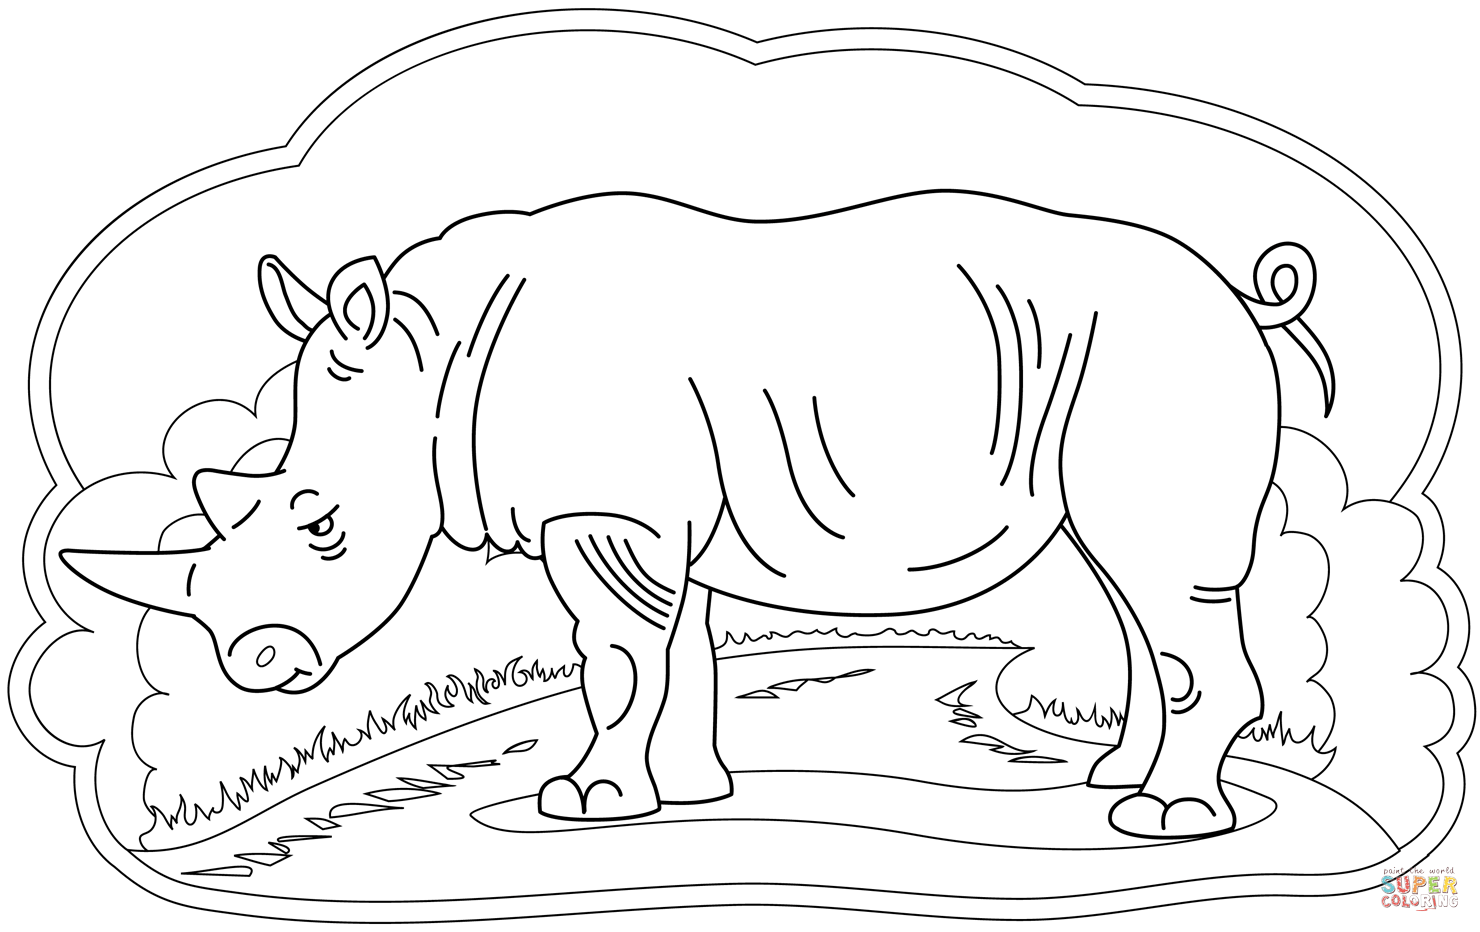 Rhinoceros coloring page free printable coloring pages